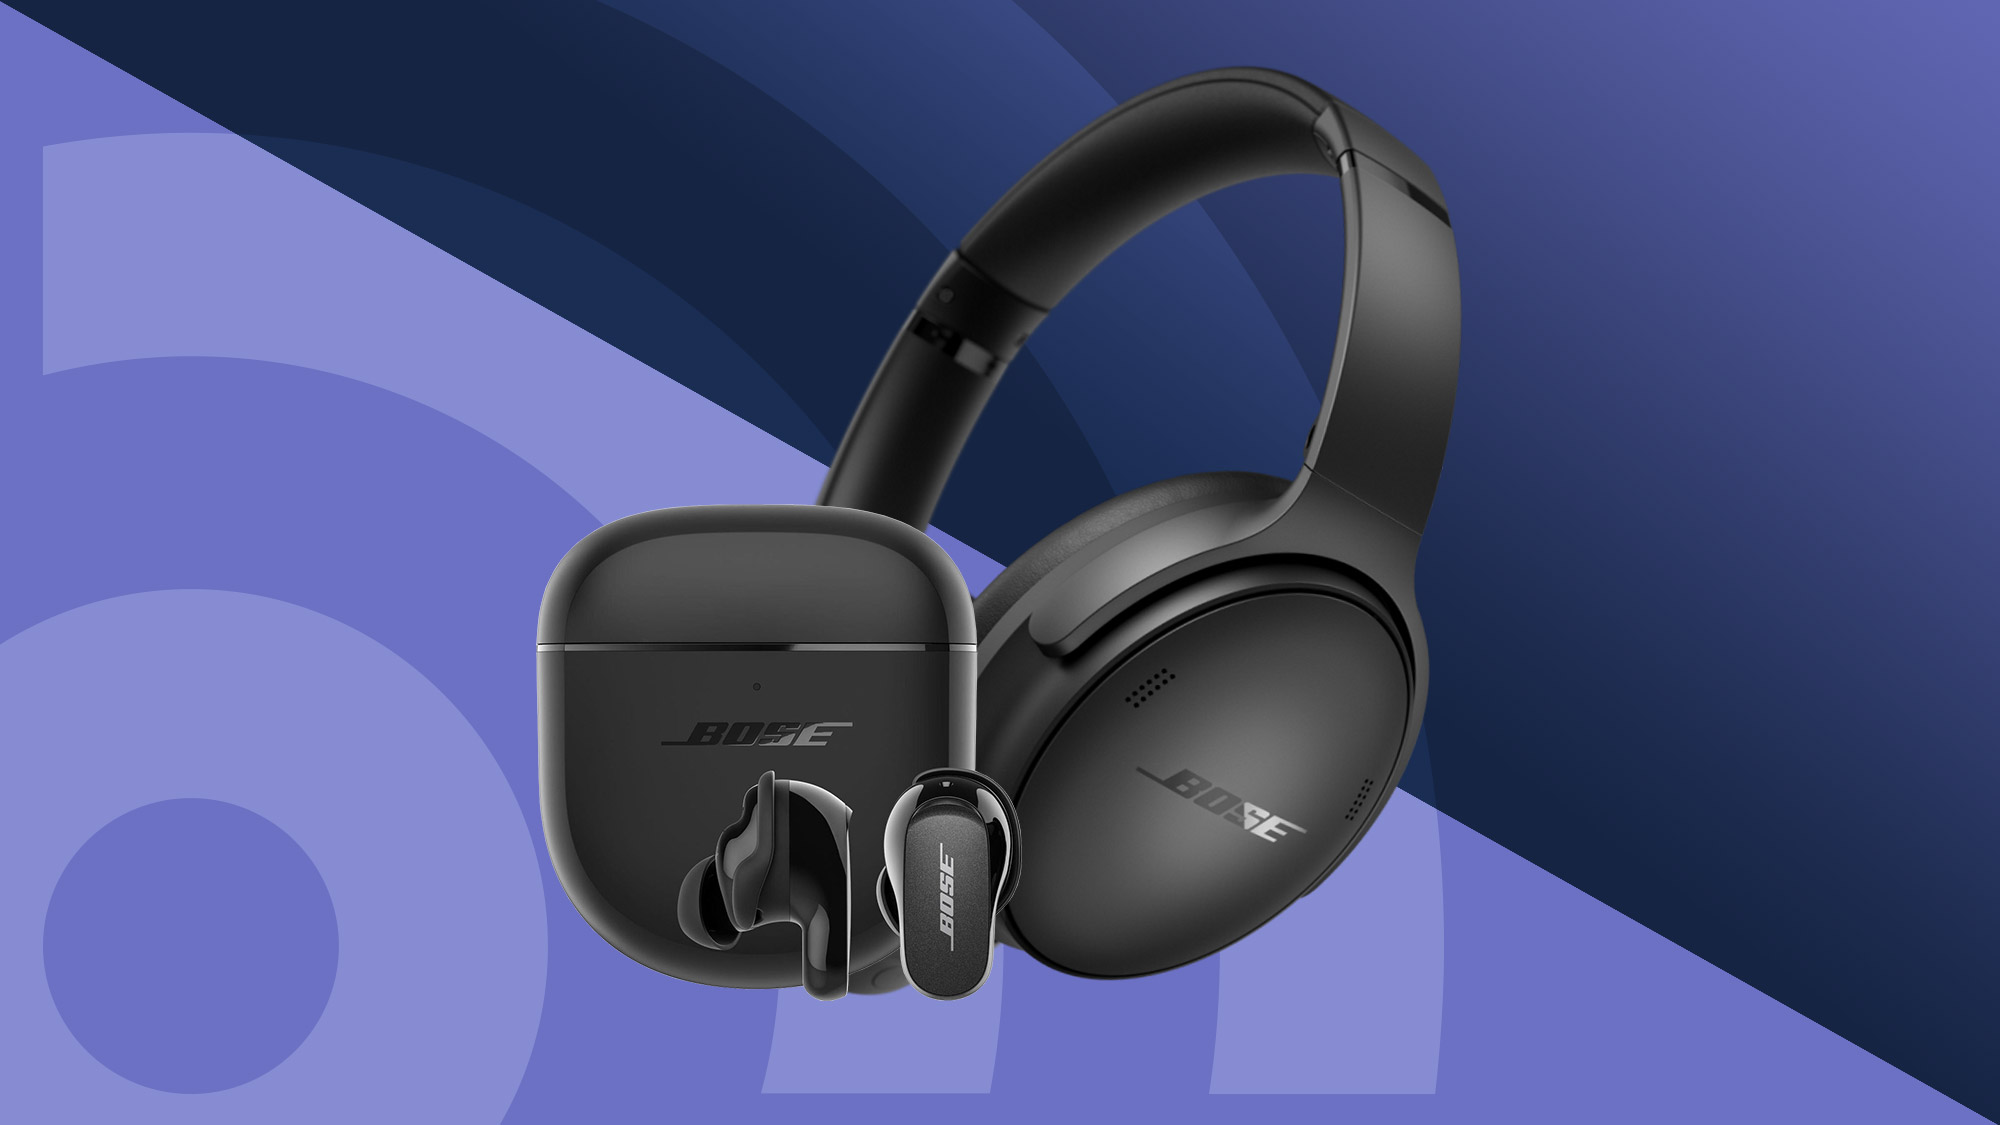 Bose 700 headphones review: Impressive noise cancellation with sleek design